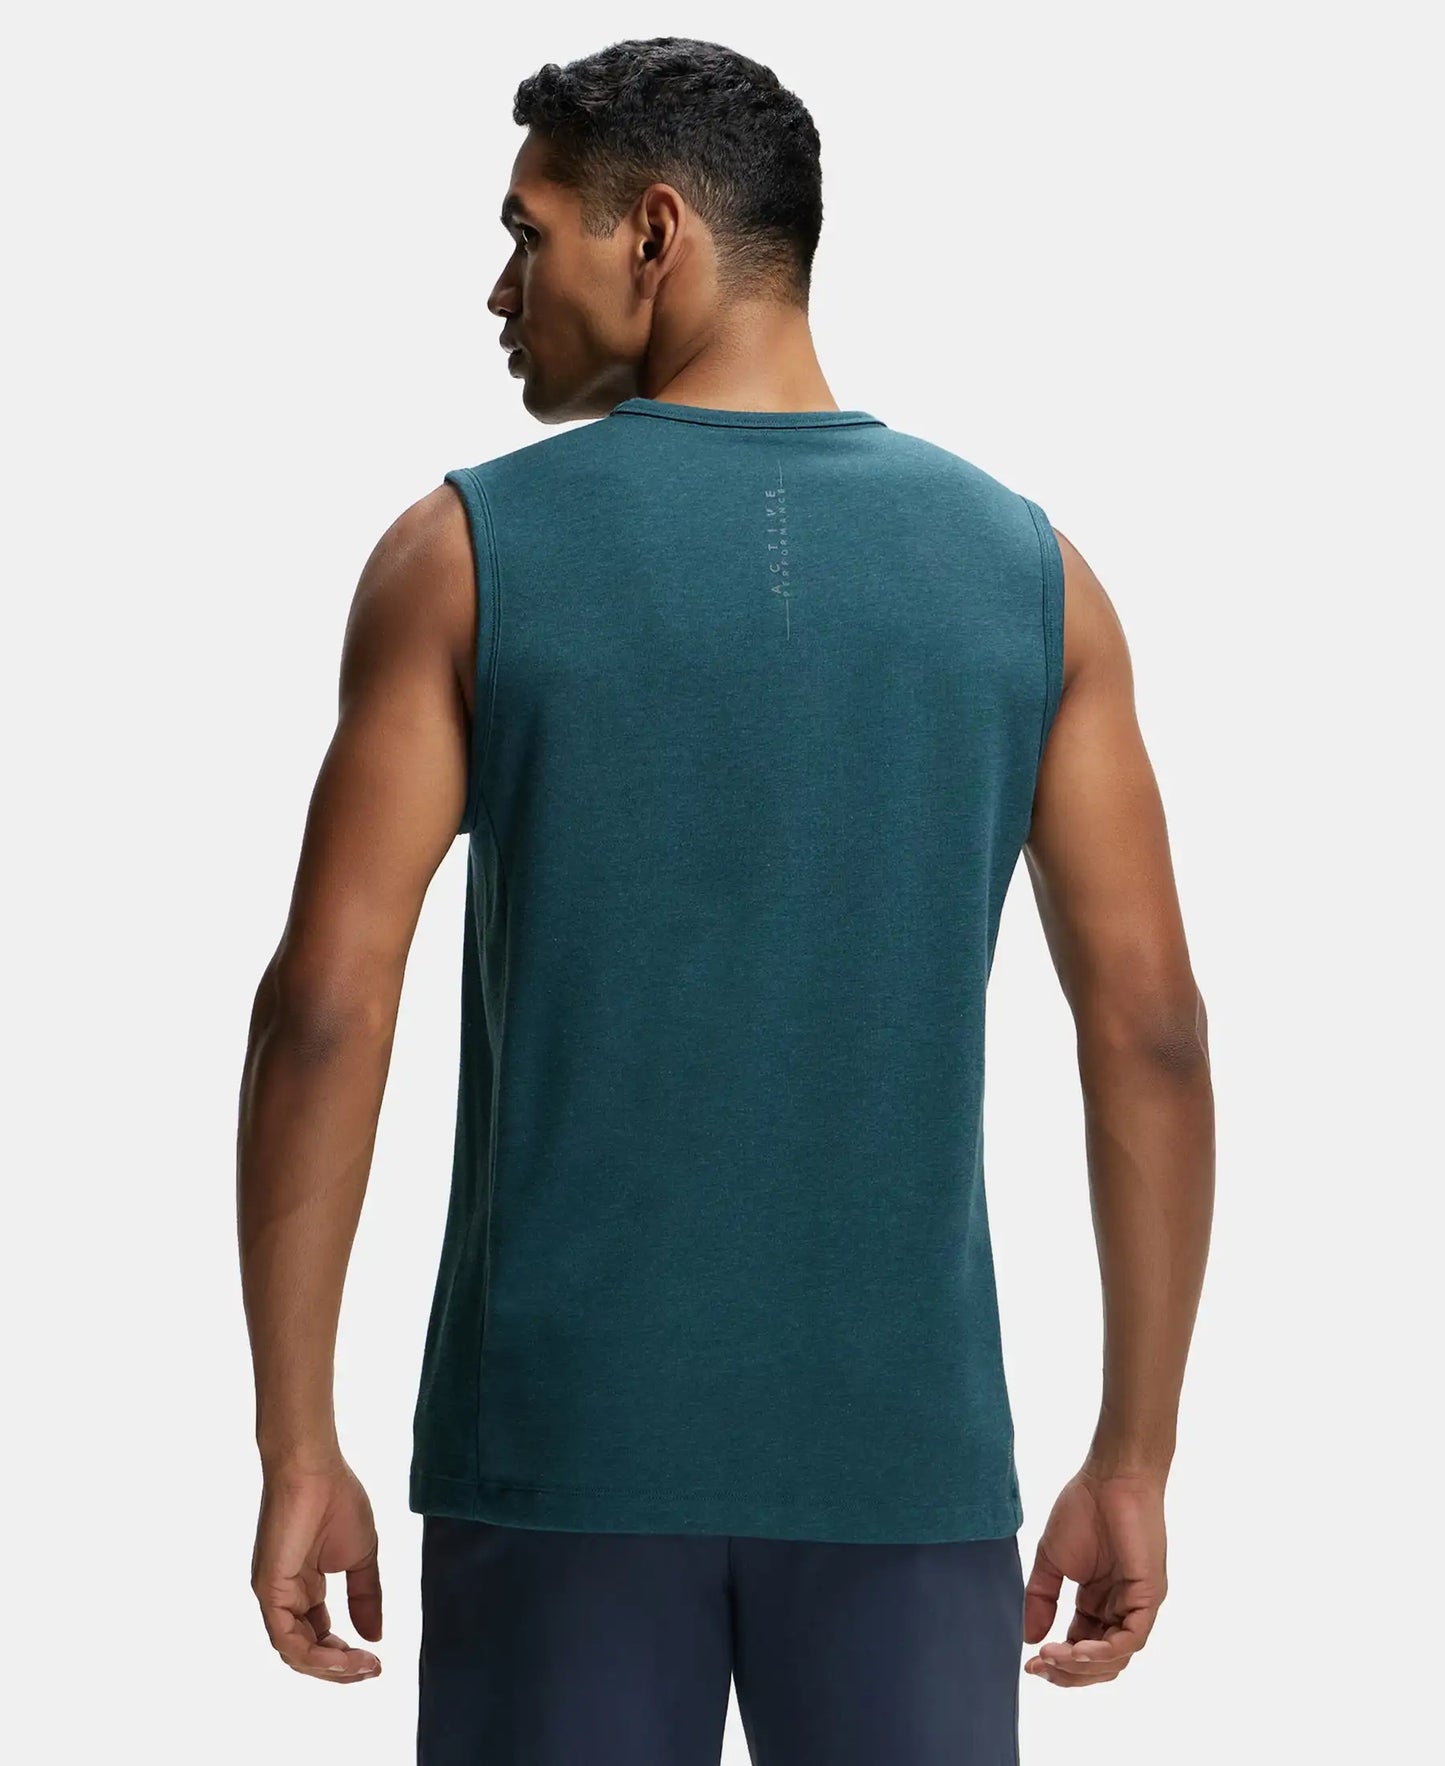 Super Combed Cotton Blend Round Neck Muscle Tee with Breathable Mesh - Pine Melange-3